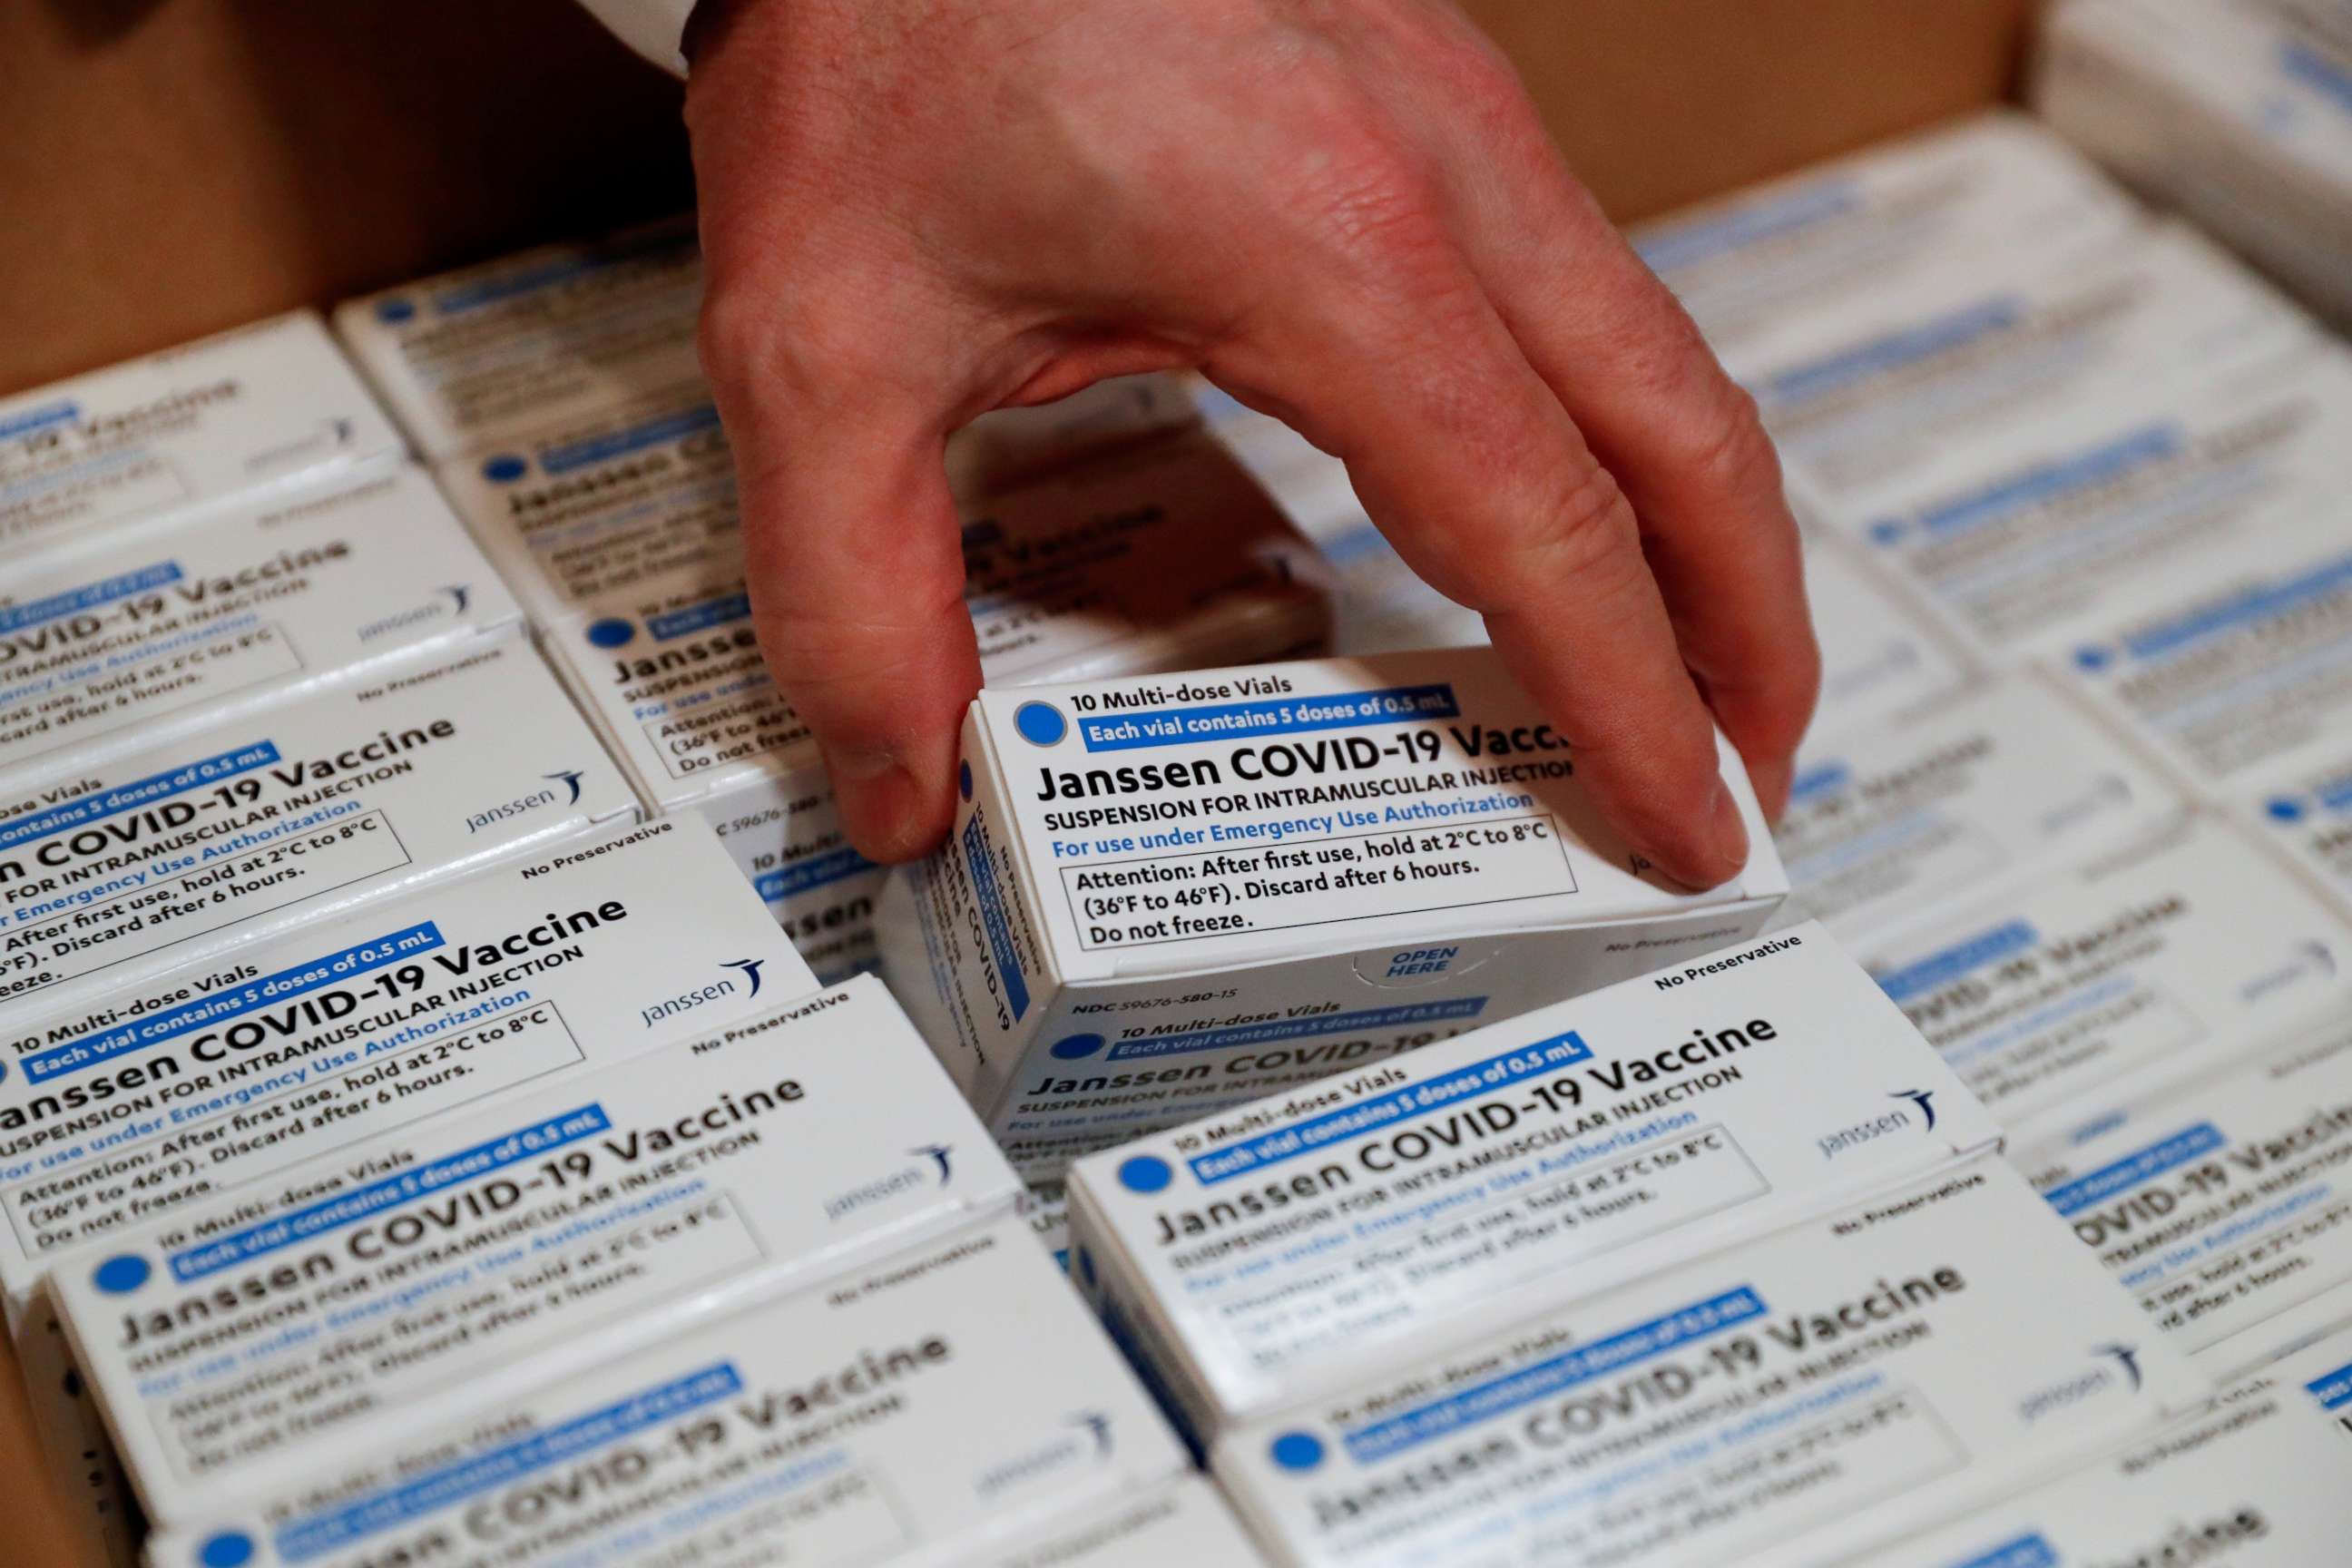 PHOTO: Boxes of Johnson & Johnson's coronavirus disease vaccine are seen at Northwell Health's South Shore University Hospital in Bay Shore, N.Y., March 3, 2021.